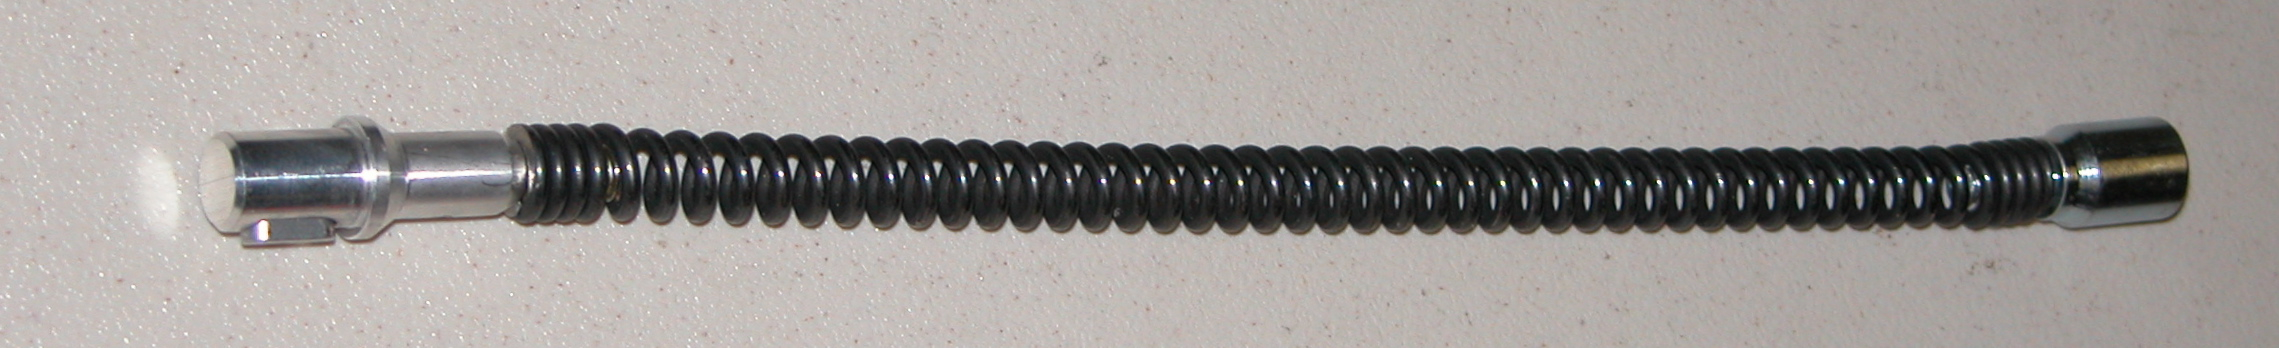 5169 Spring Leader w/male and female small ButtonLok ends, 10